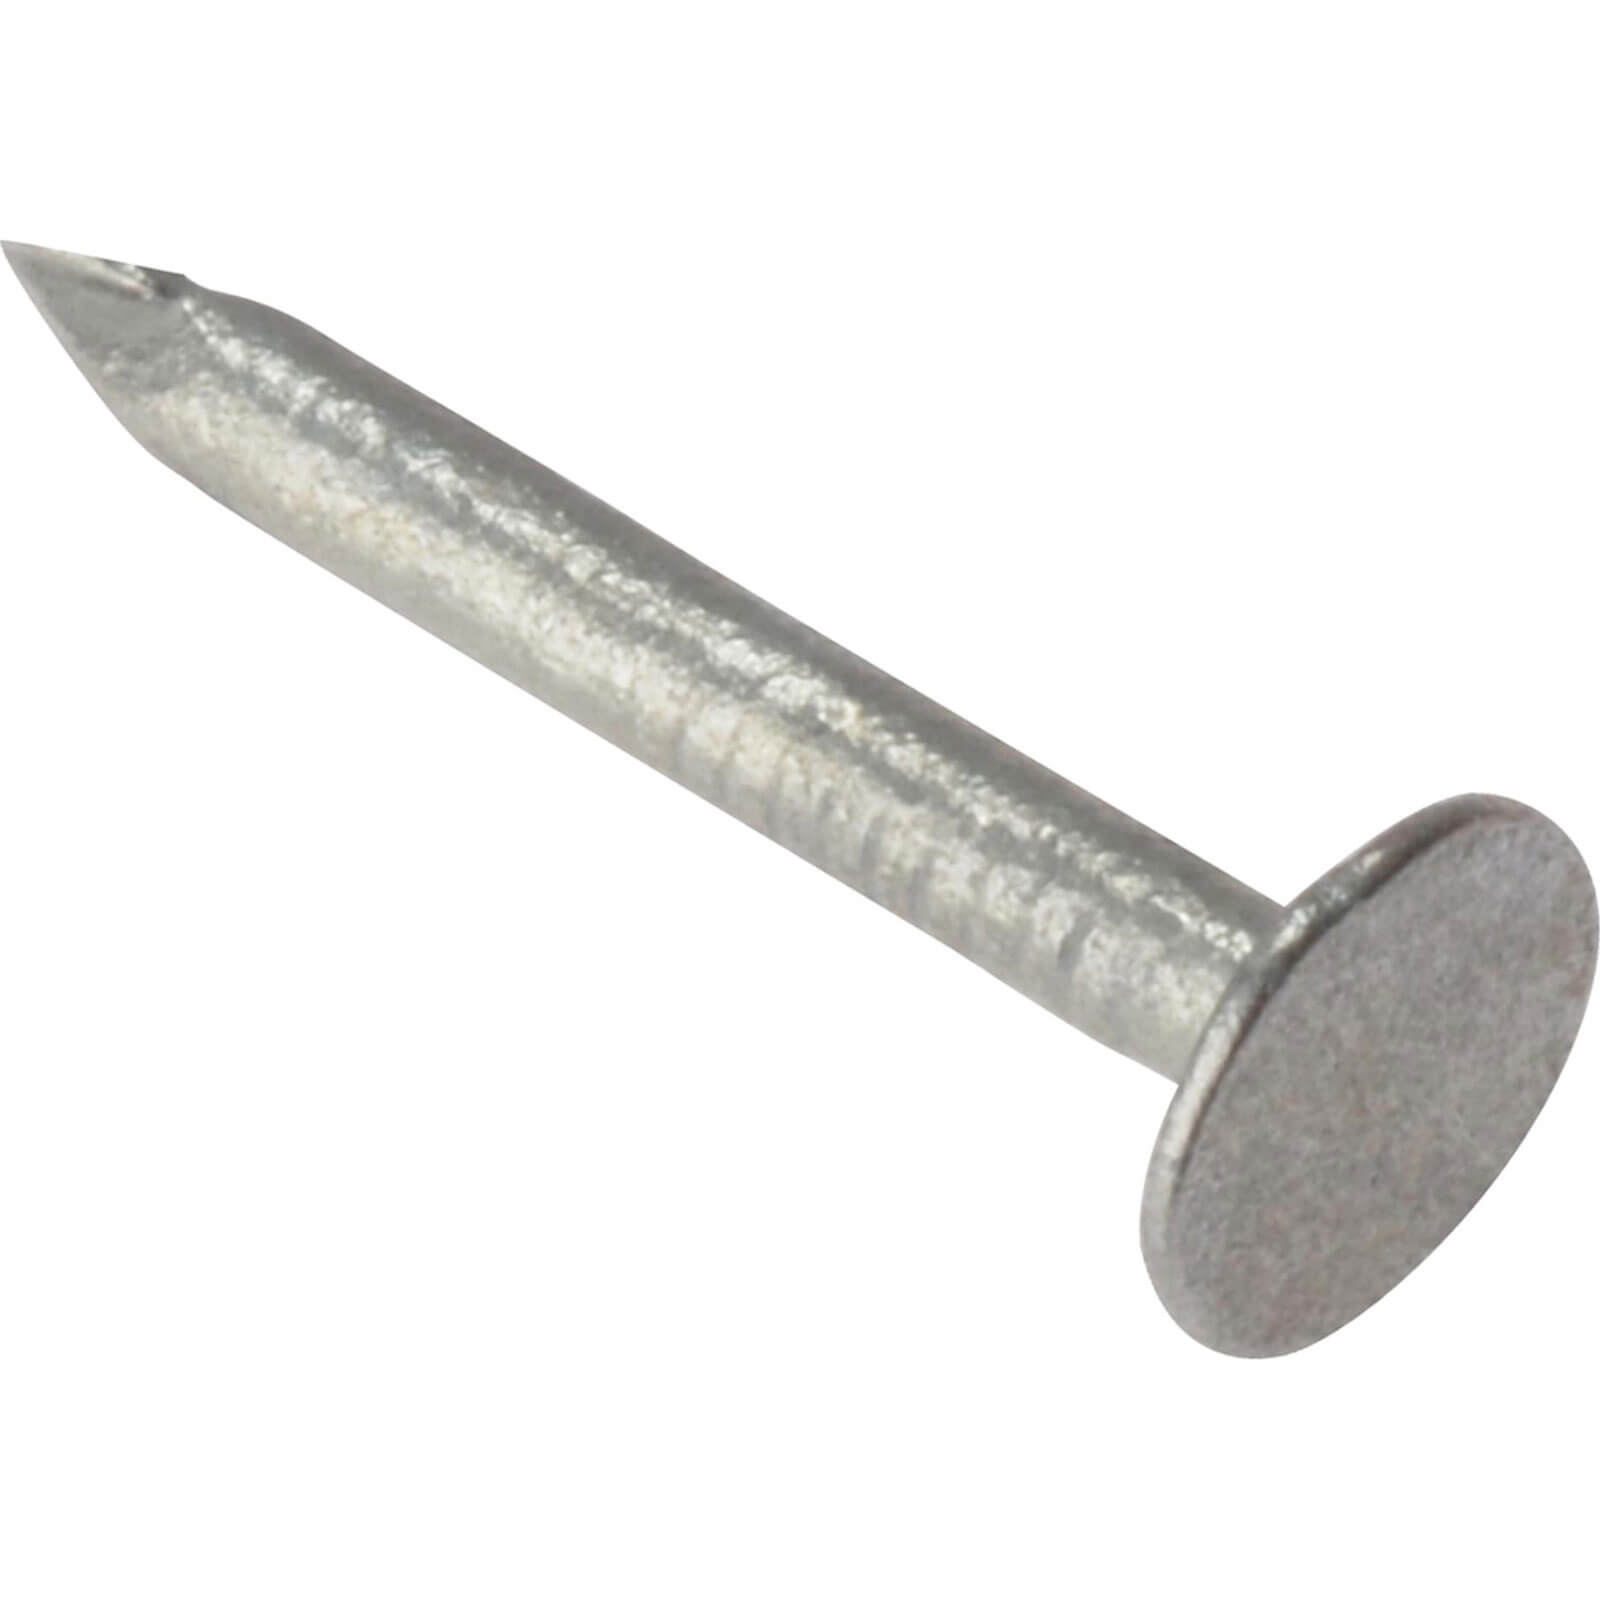 Image of Forgefix Multipurpose Galvanised Clout Nails 40mm 2.5kg